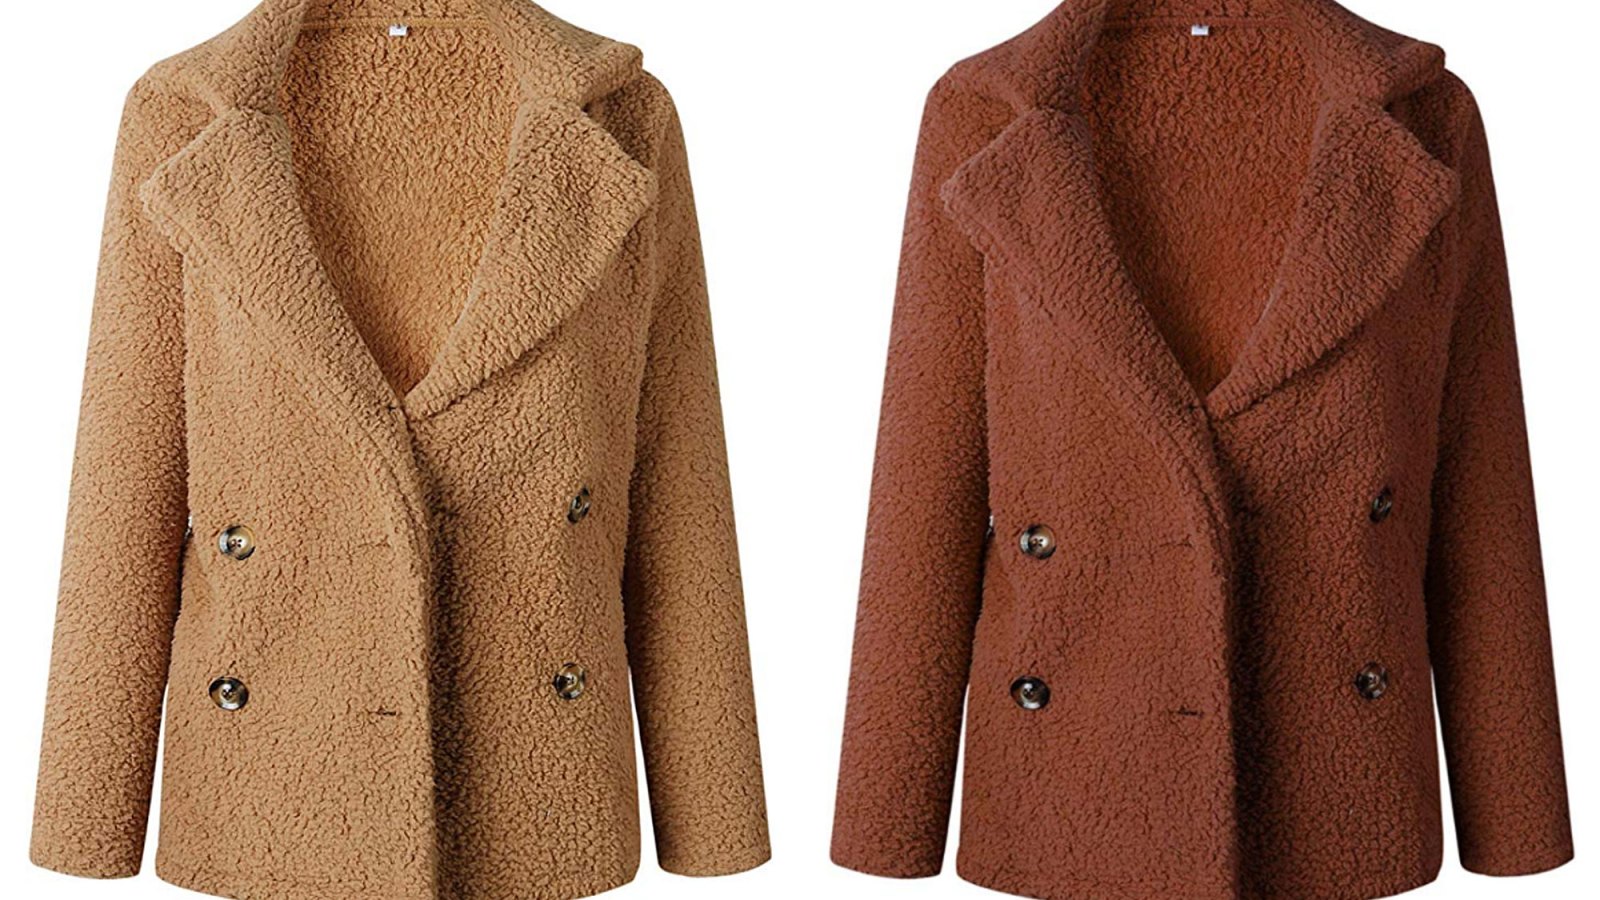 Faux Shearling Coat Available on Amazon